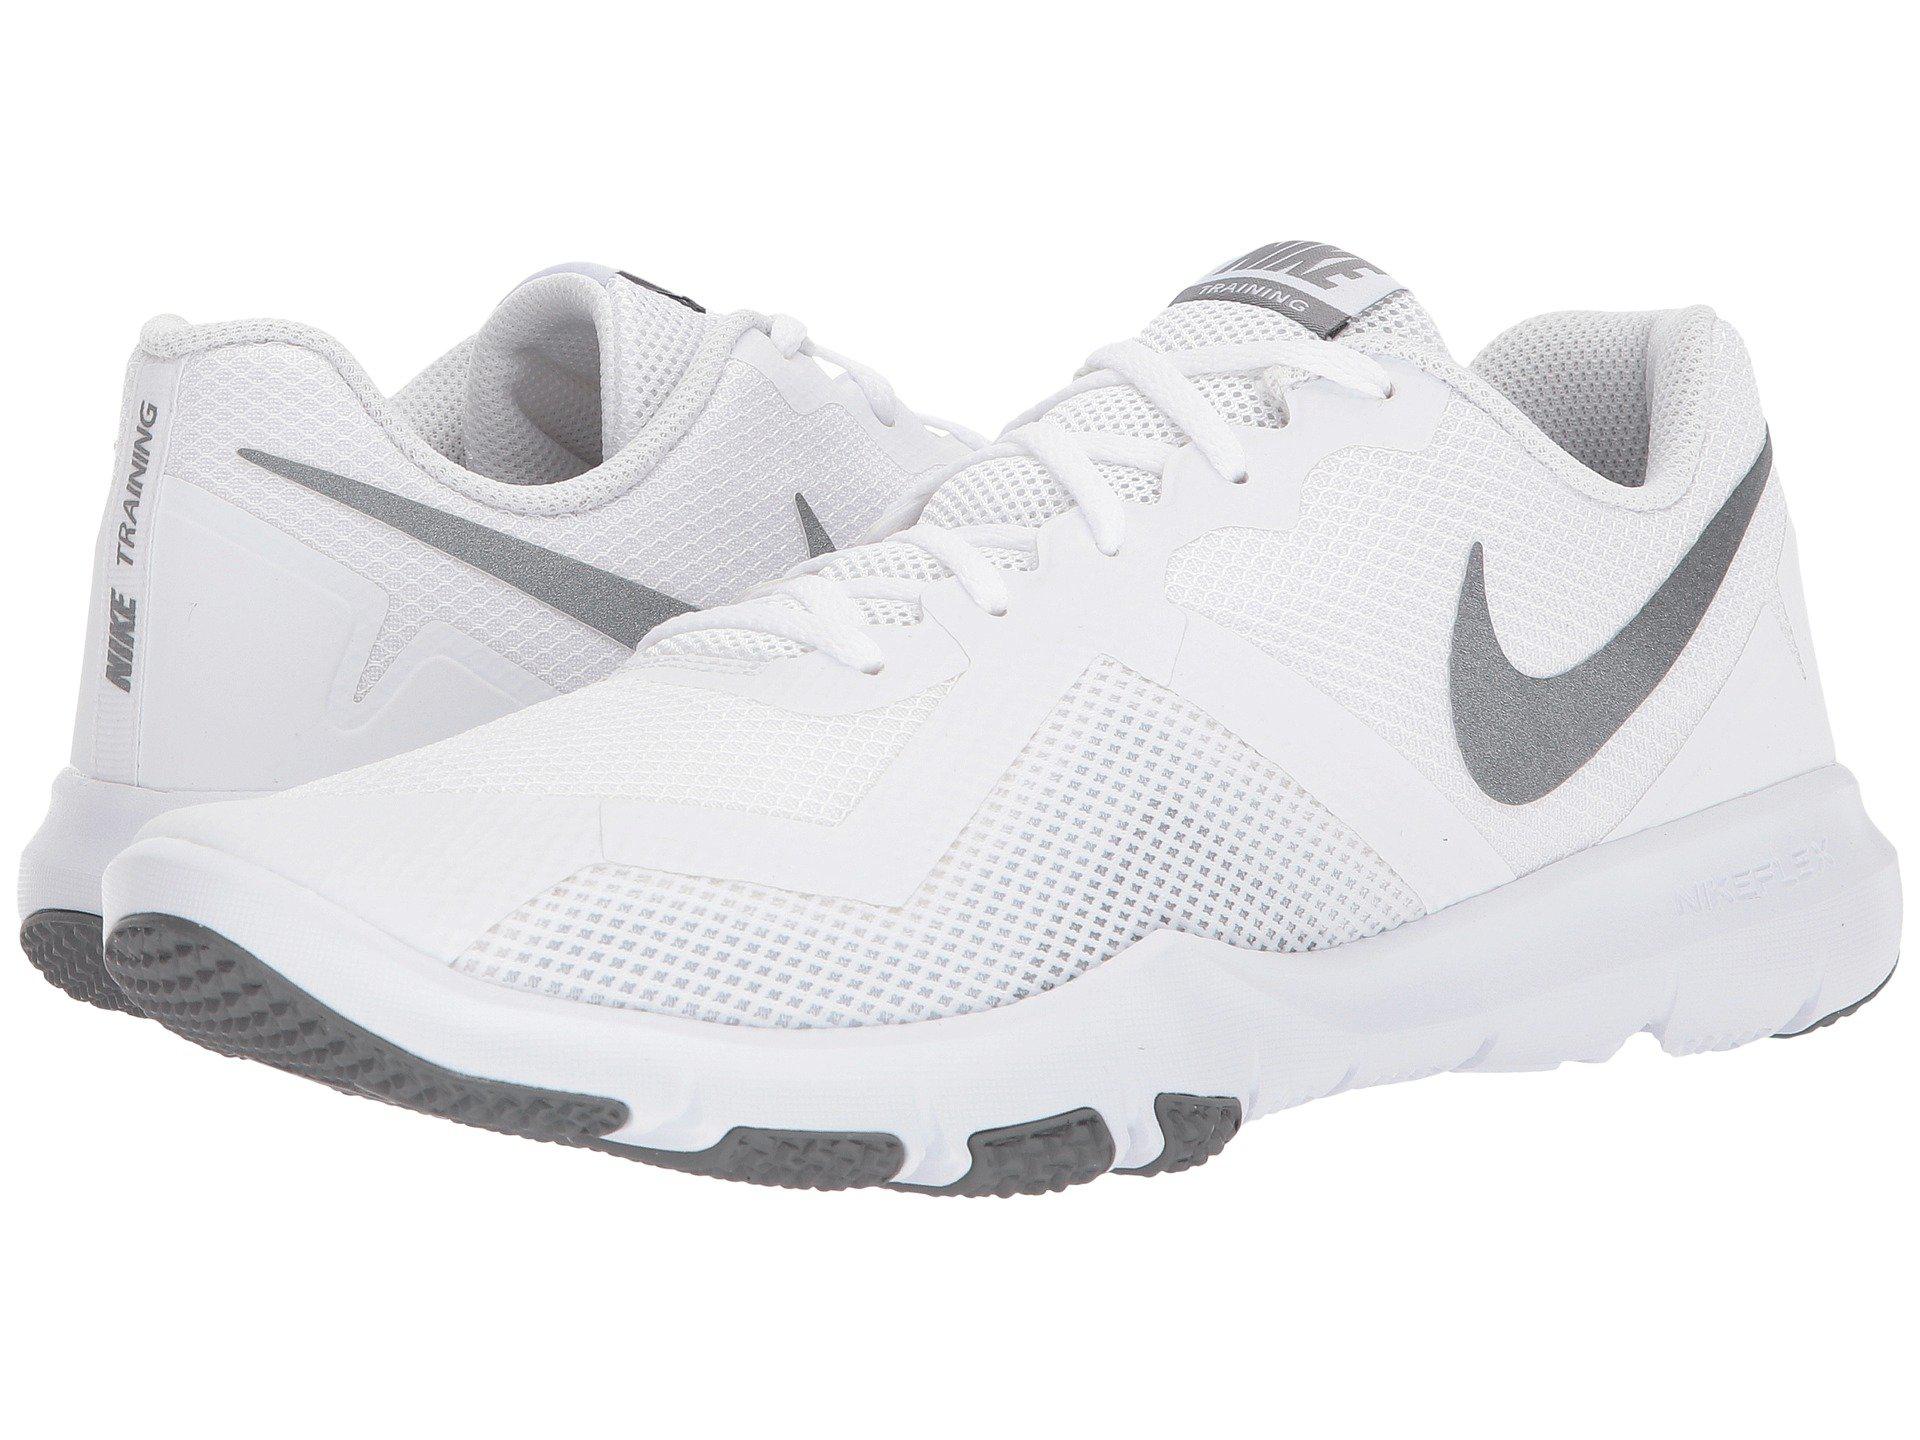 Nike Synthetic Flex Control Ii Training Shoe in White/Metallic Cool  Grey/Cool gr (White) for Men - Lyst